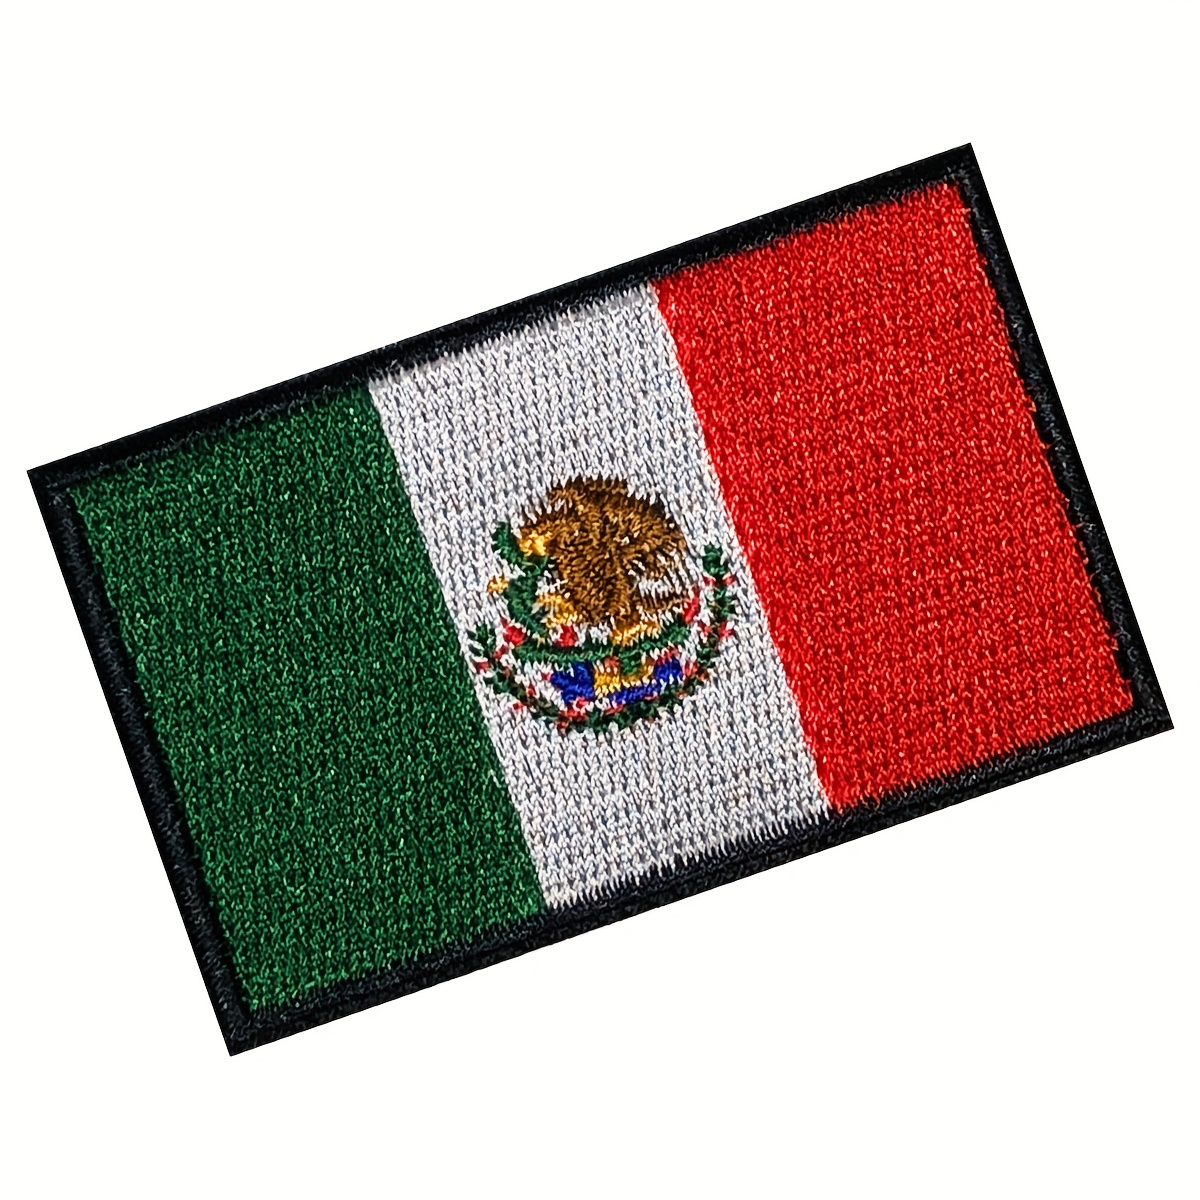 Graphic Dust Mexico Flag Embroidered Iron On Patch Applique Mexican Flag  Costume Uniform DIY Jean Jacket